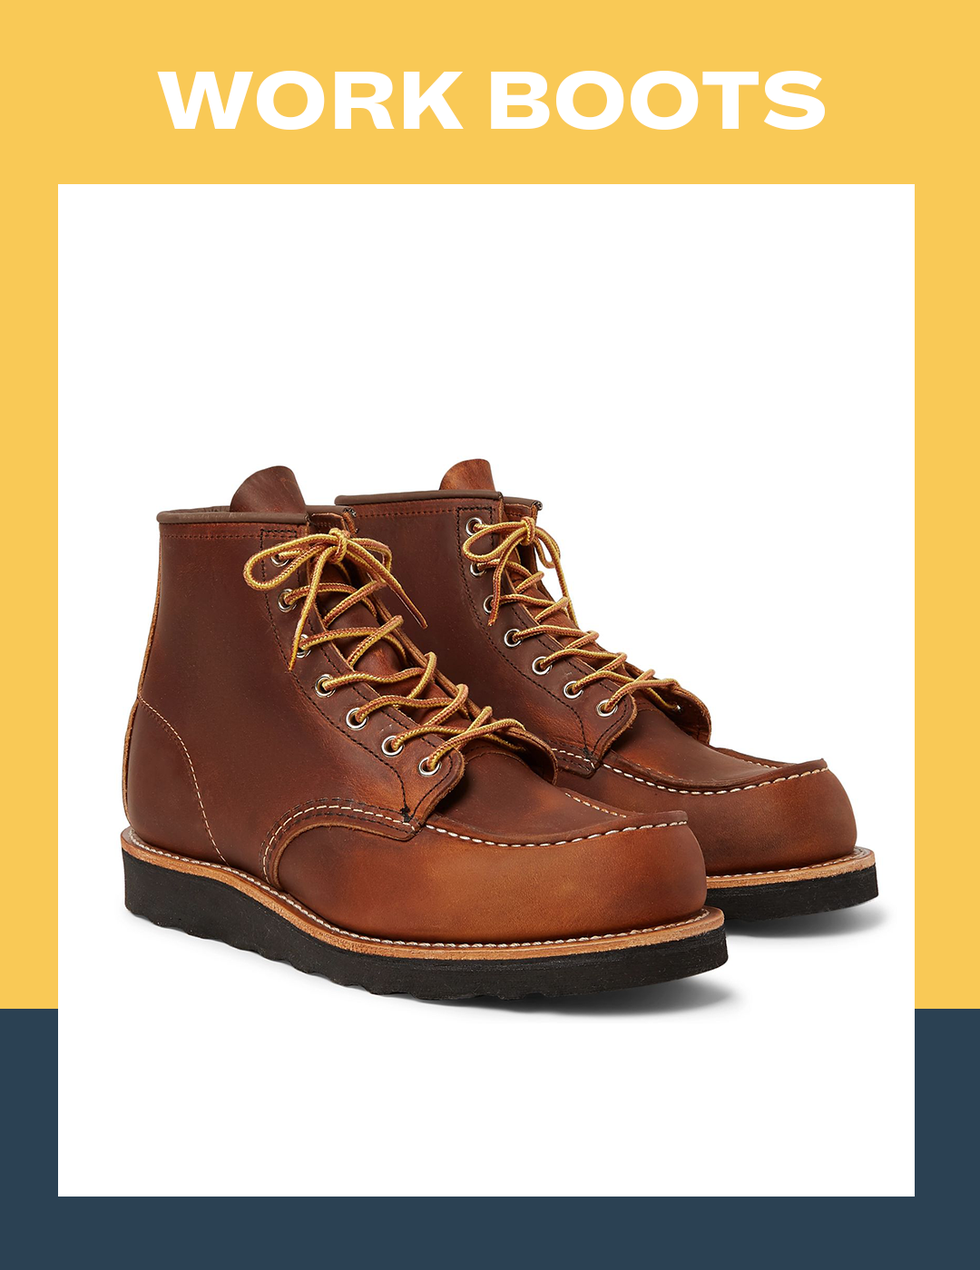 Footwear, Shoe, Boot, Brown, Product, Tan, Hiking boot, Steel-toe boot, Font, Work boots, 